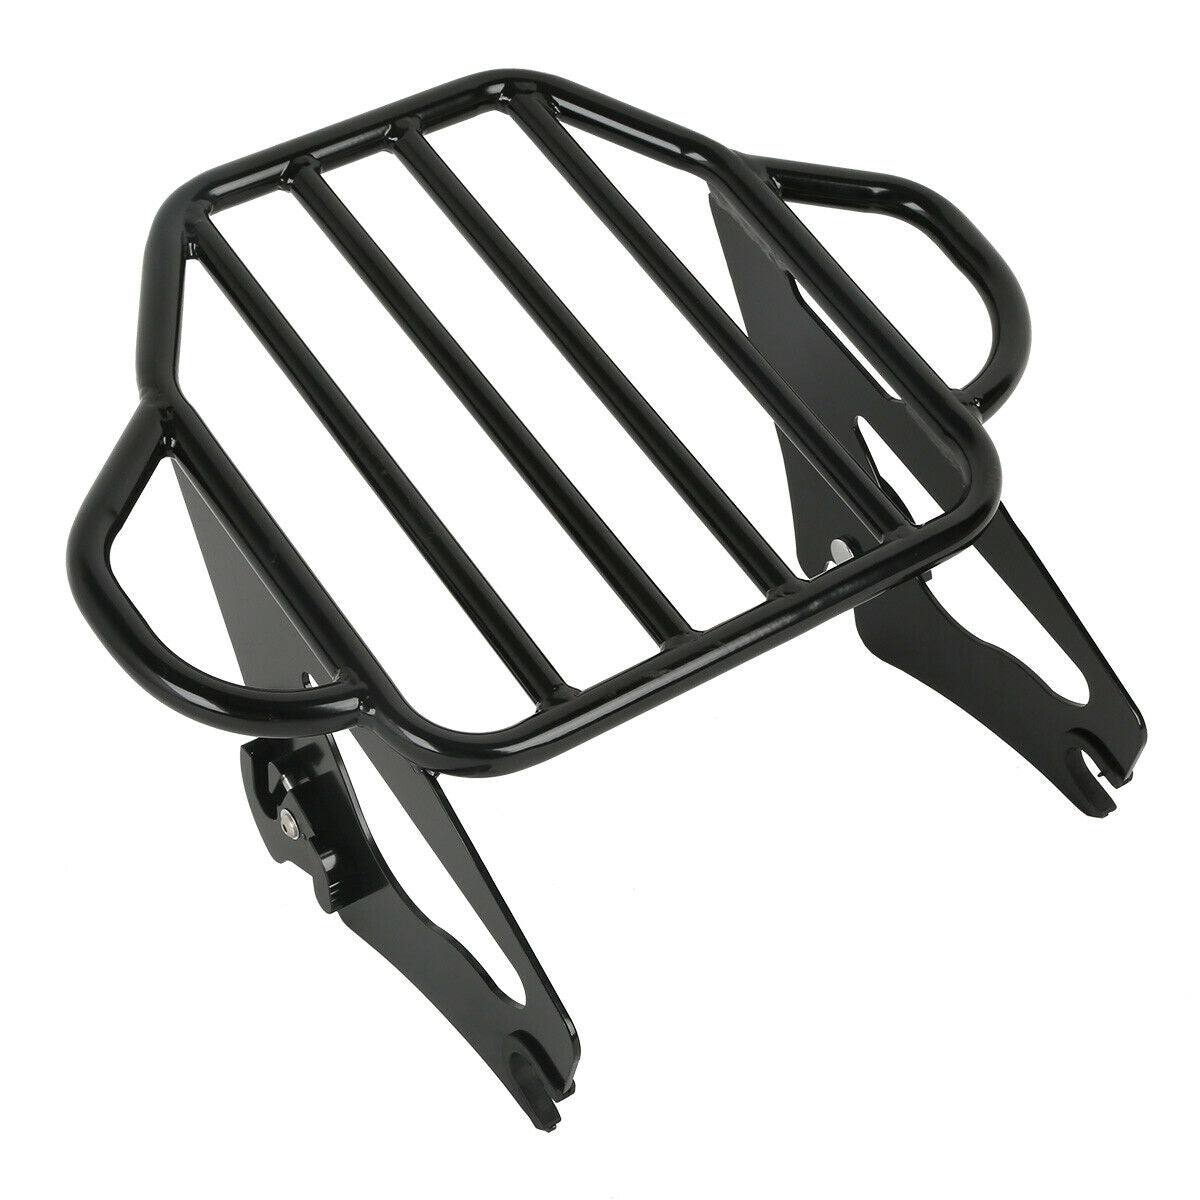 Two Up Detachable Luggage Rack Fit For Harley Road Electra Glide FLTRX 2009-2022 - Moto Life Products